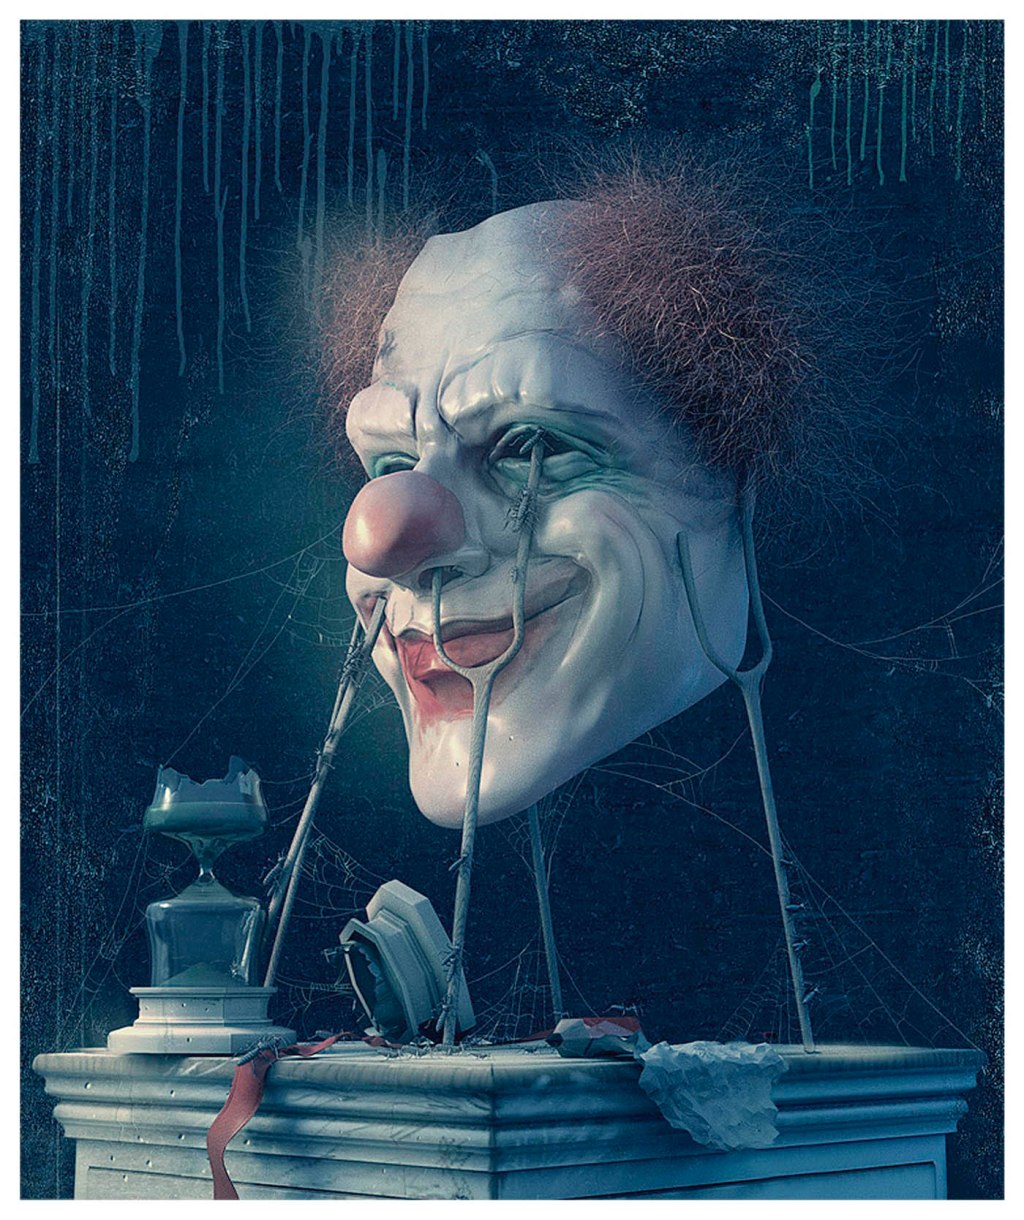  Are you afraid of clowns - Andrew Ferez